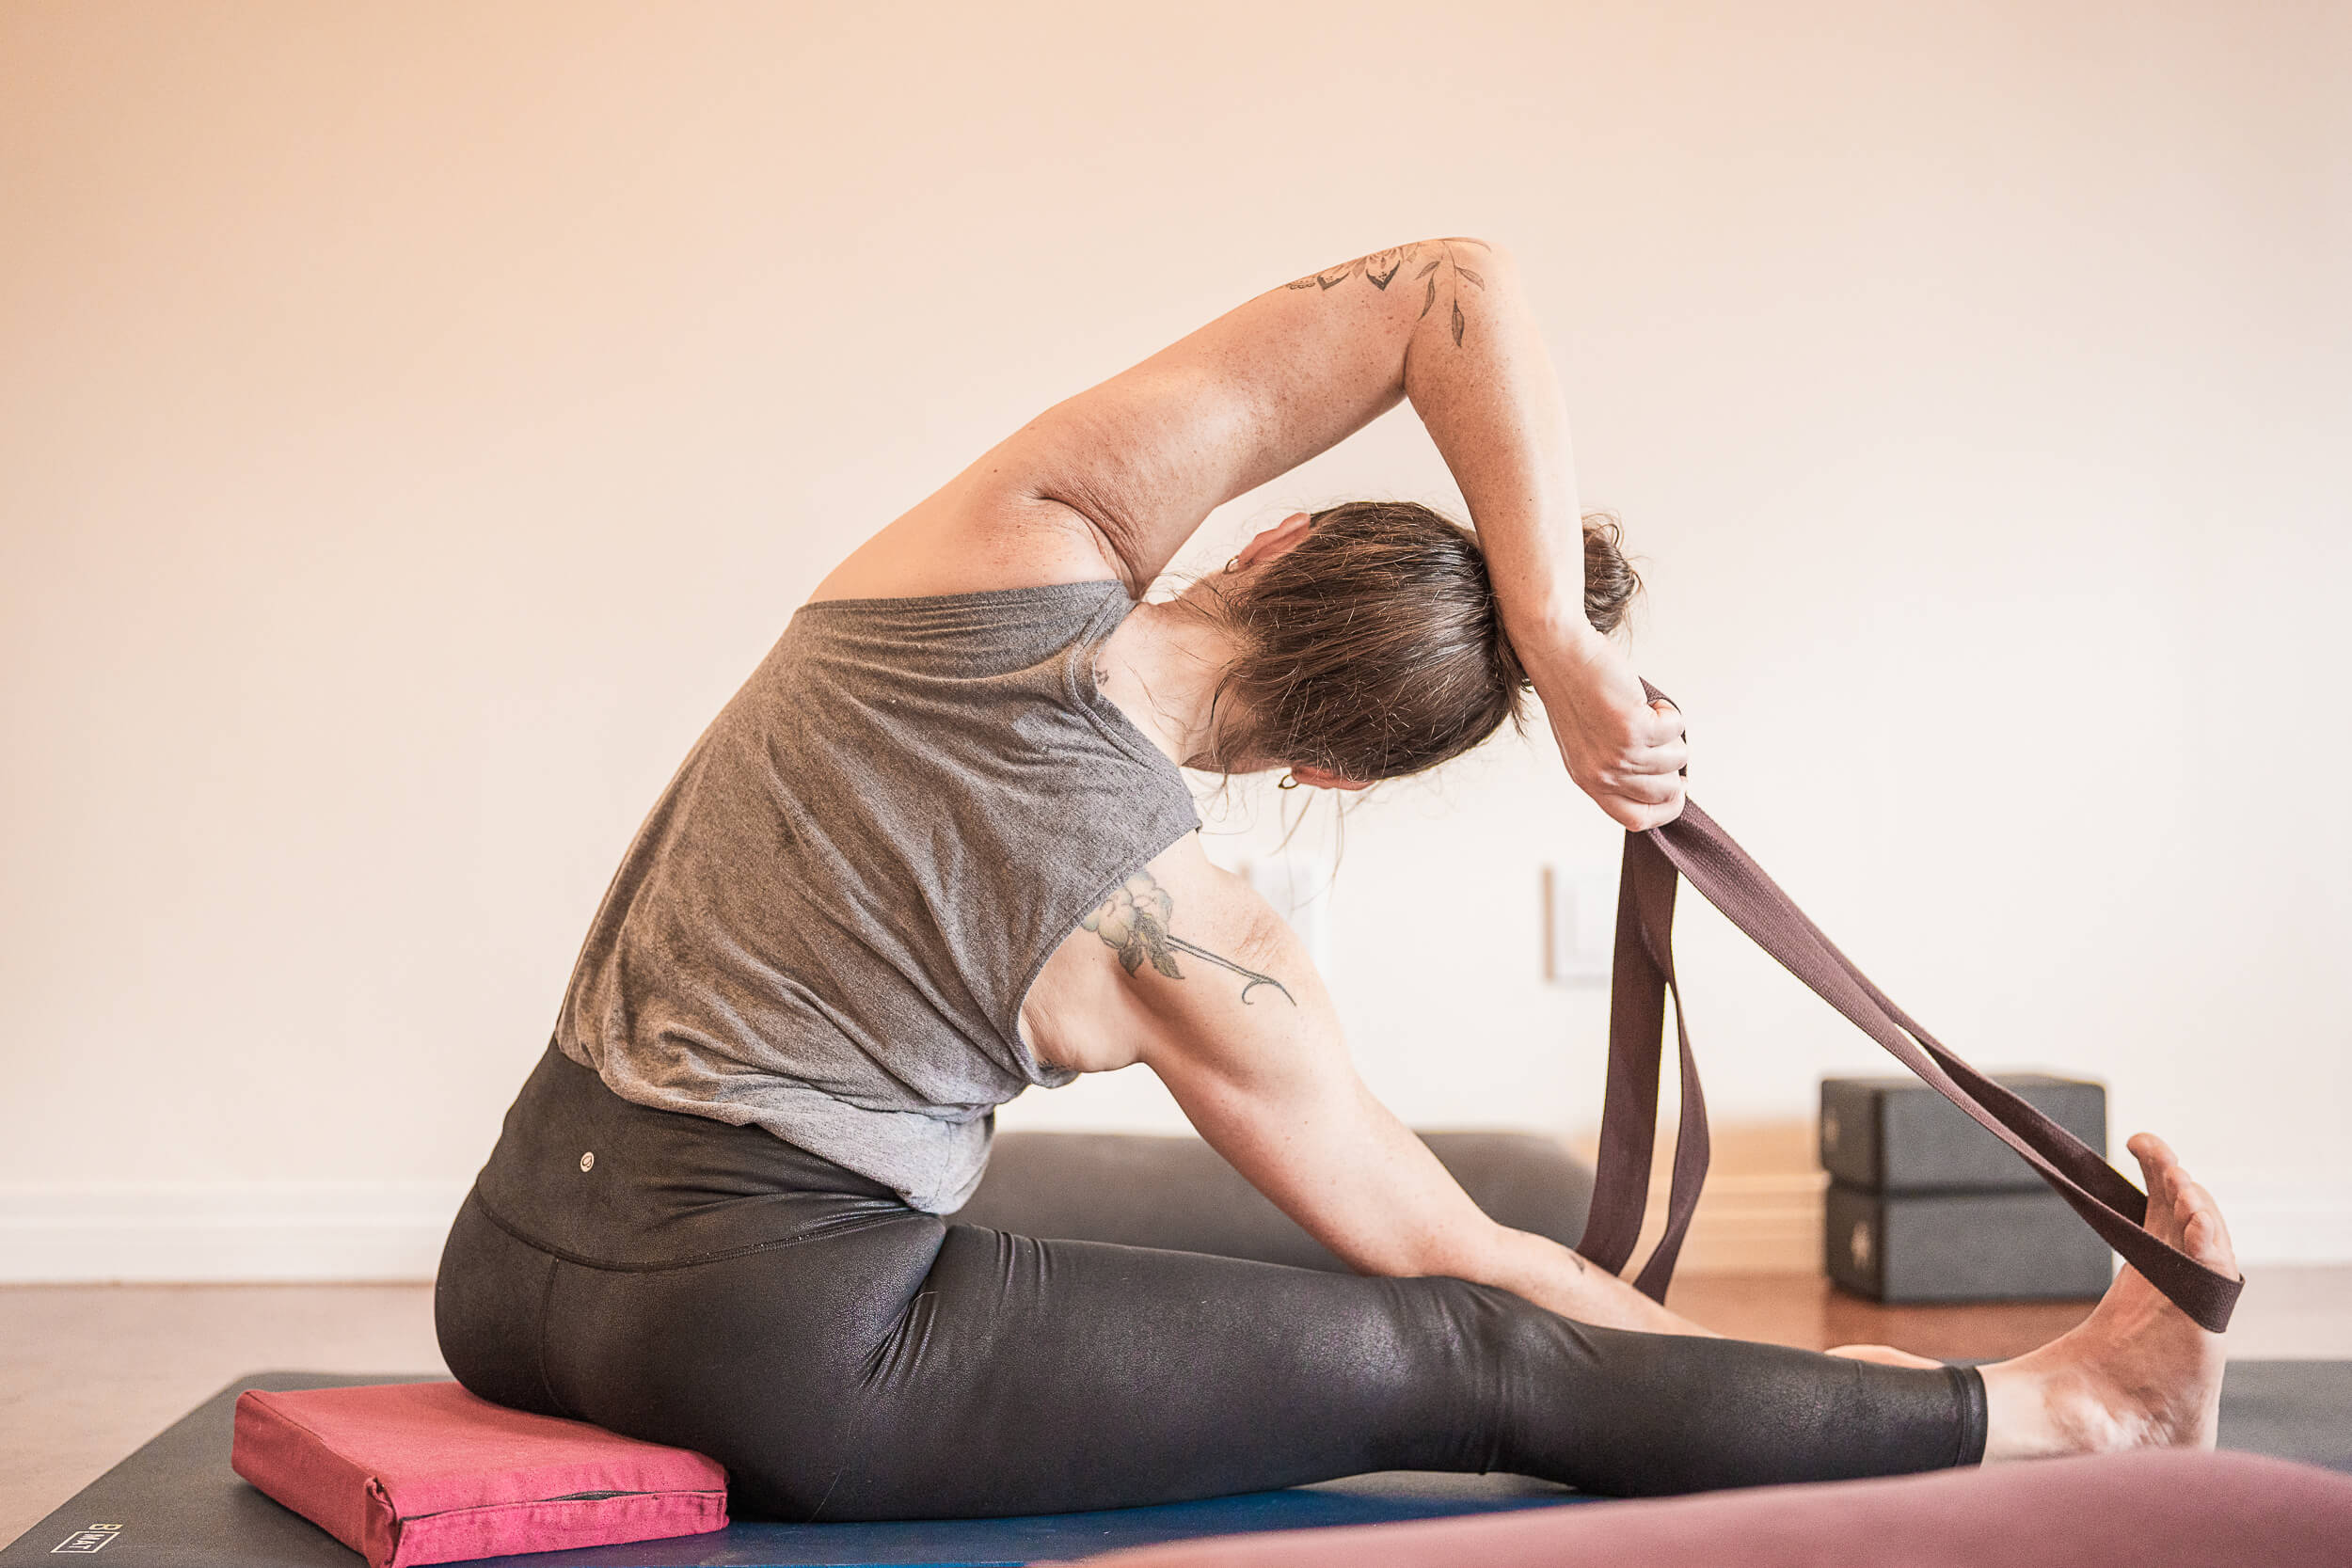 A serene and focused individual practicing a yoga pose in a Shala Yoga studio. The yogi, with visible tattoos, is using a strap to deepen a seated forward bend, showcasing flexibility and poise. The tranquil and minimalistic studio space in Squamish provides an intimate and peaceful environment for personal growth and practice.